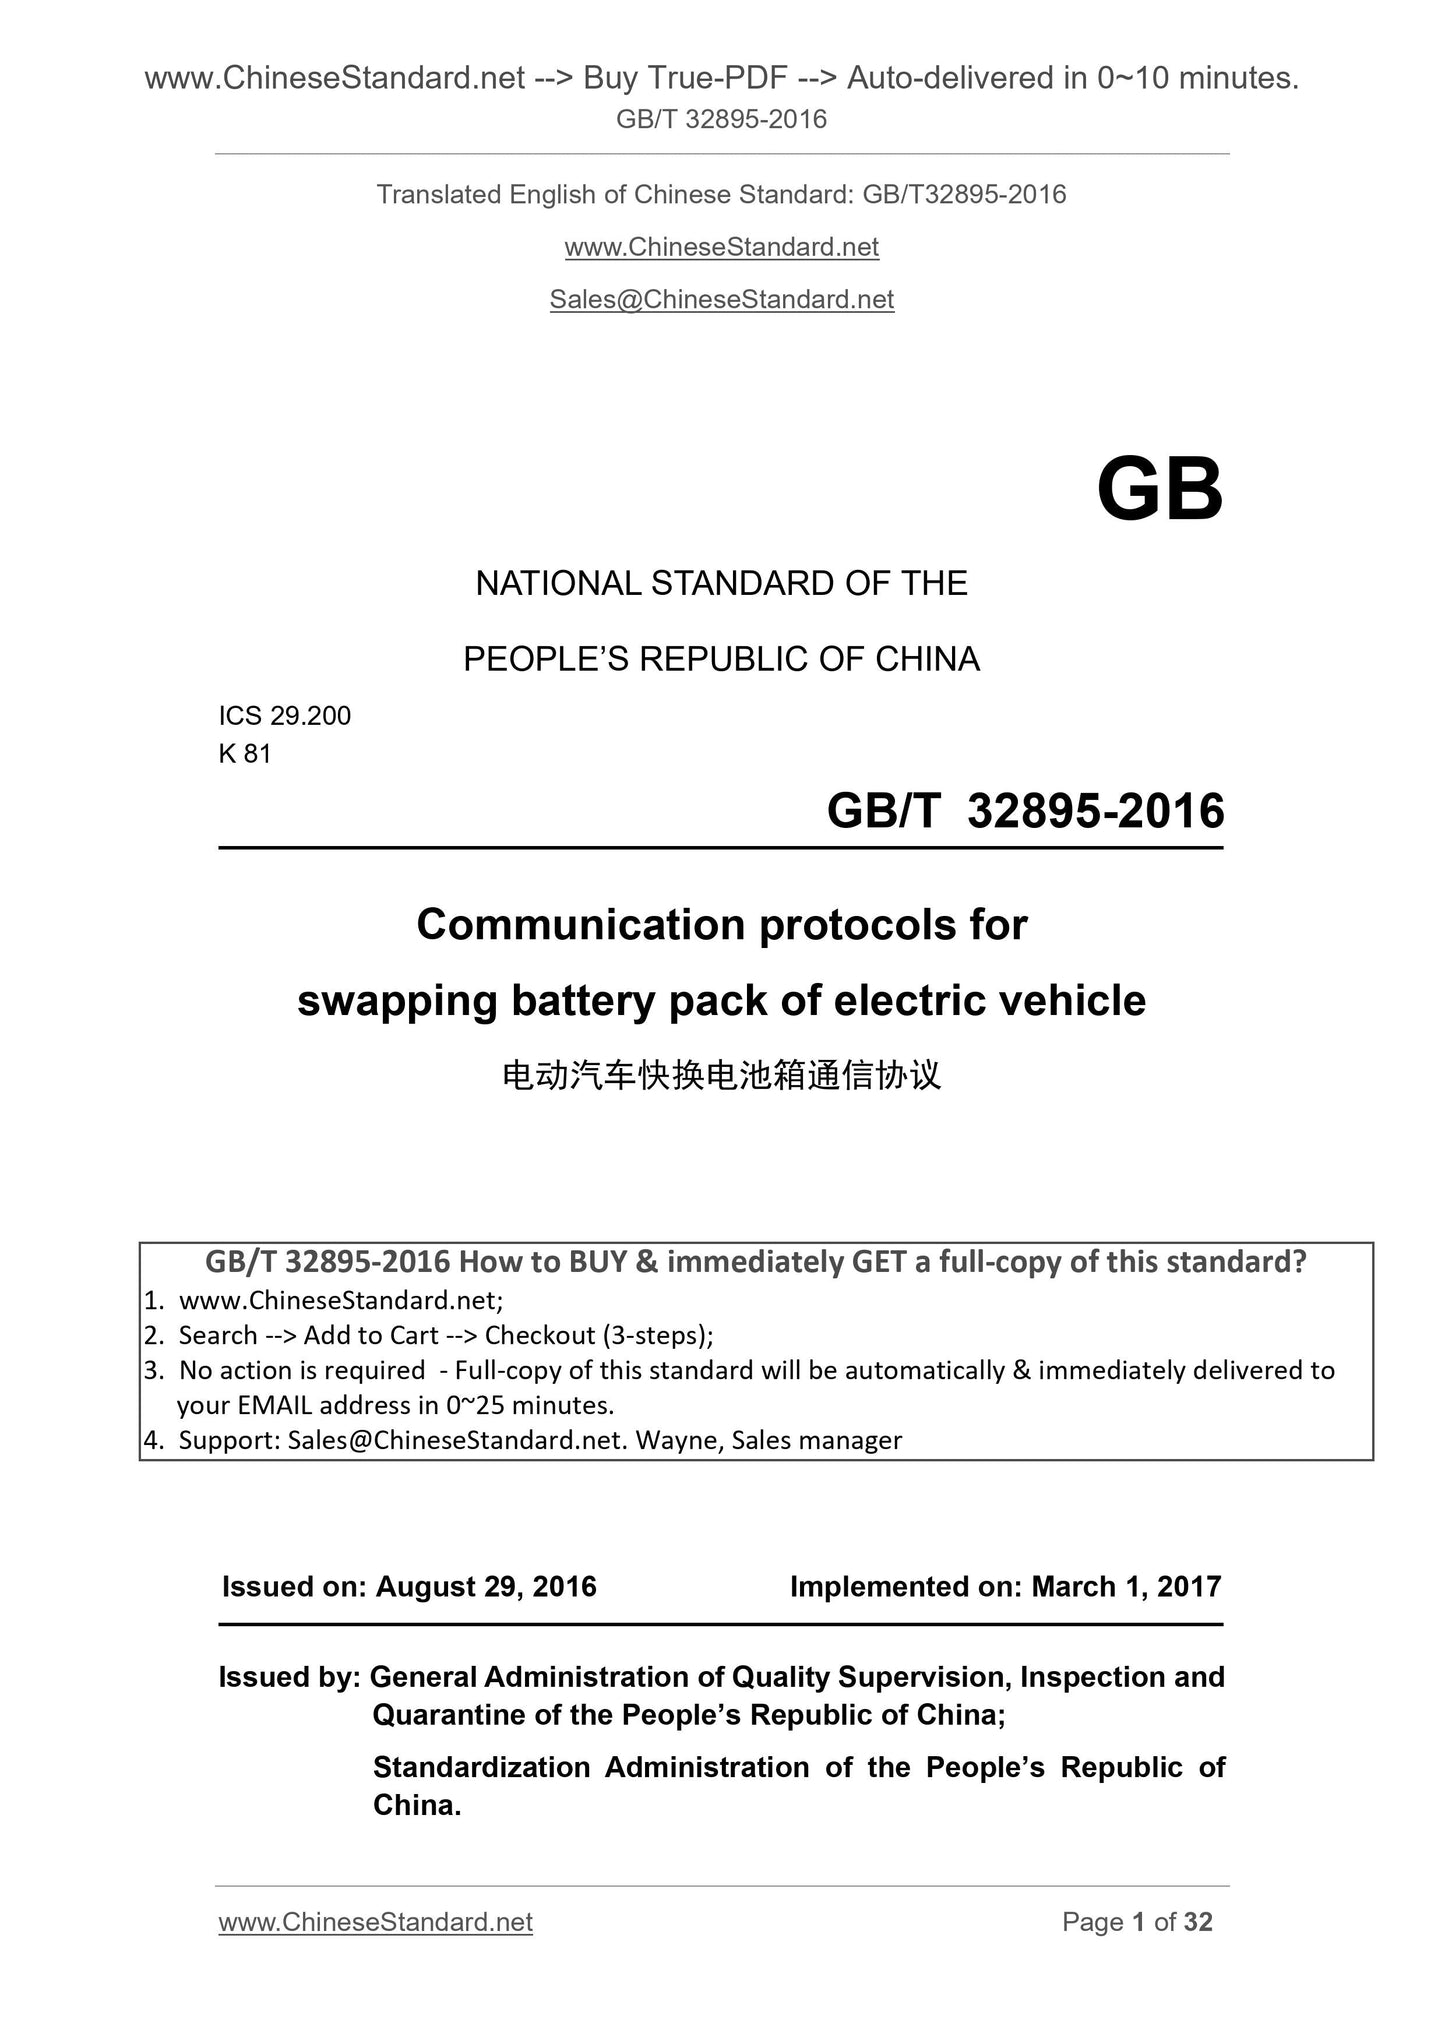 GB/T 32895-2016 Page 1